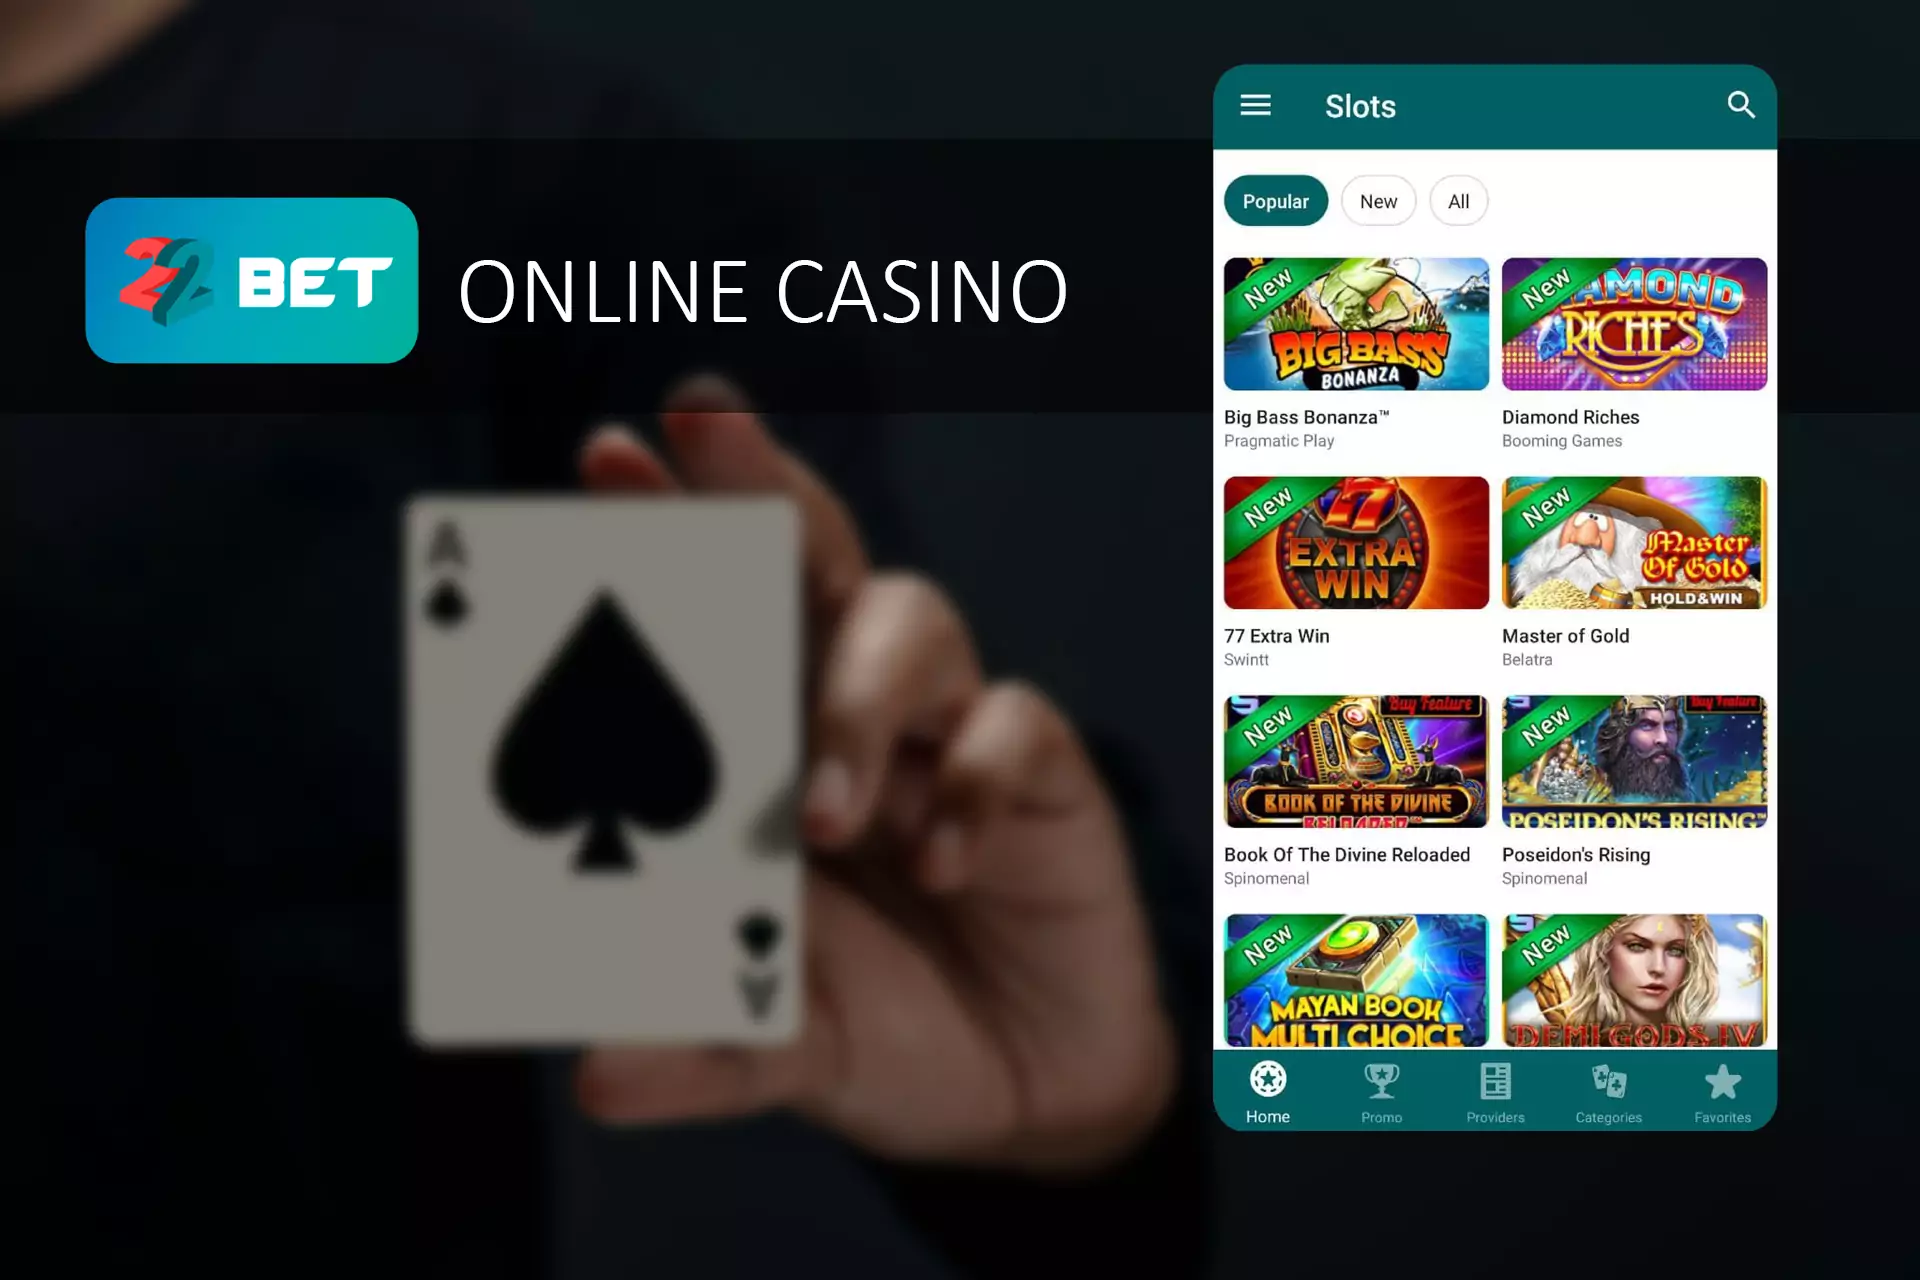 Play slots and classic table games in the casino section of the app.